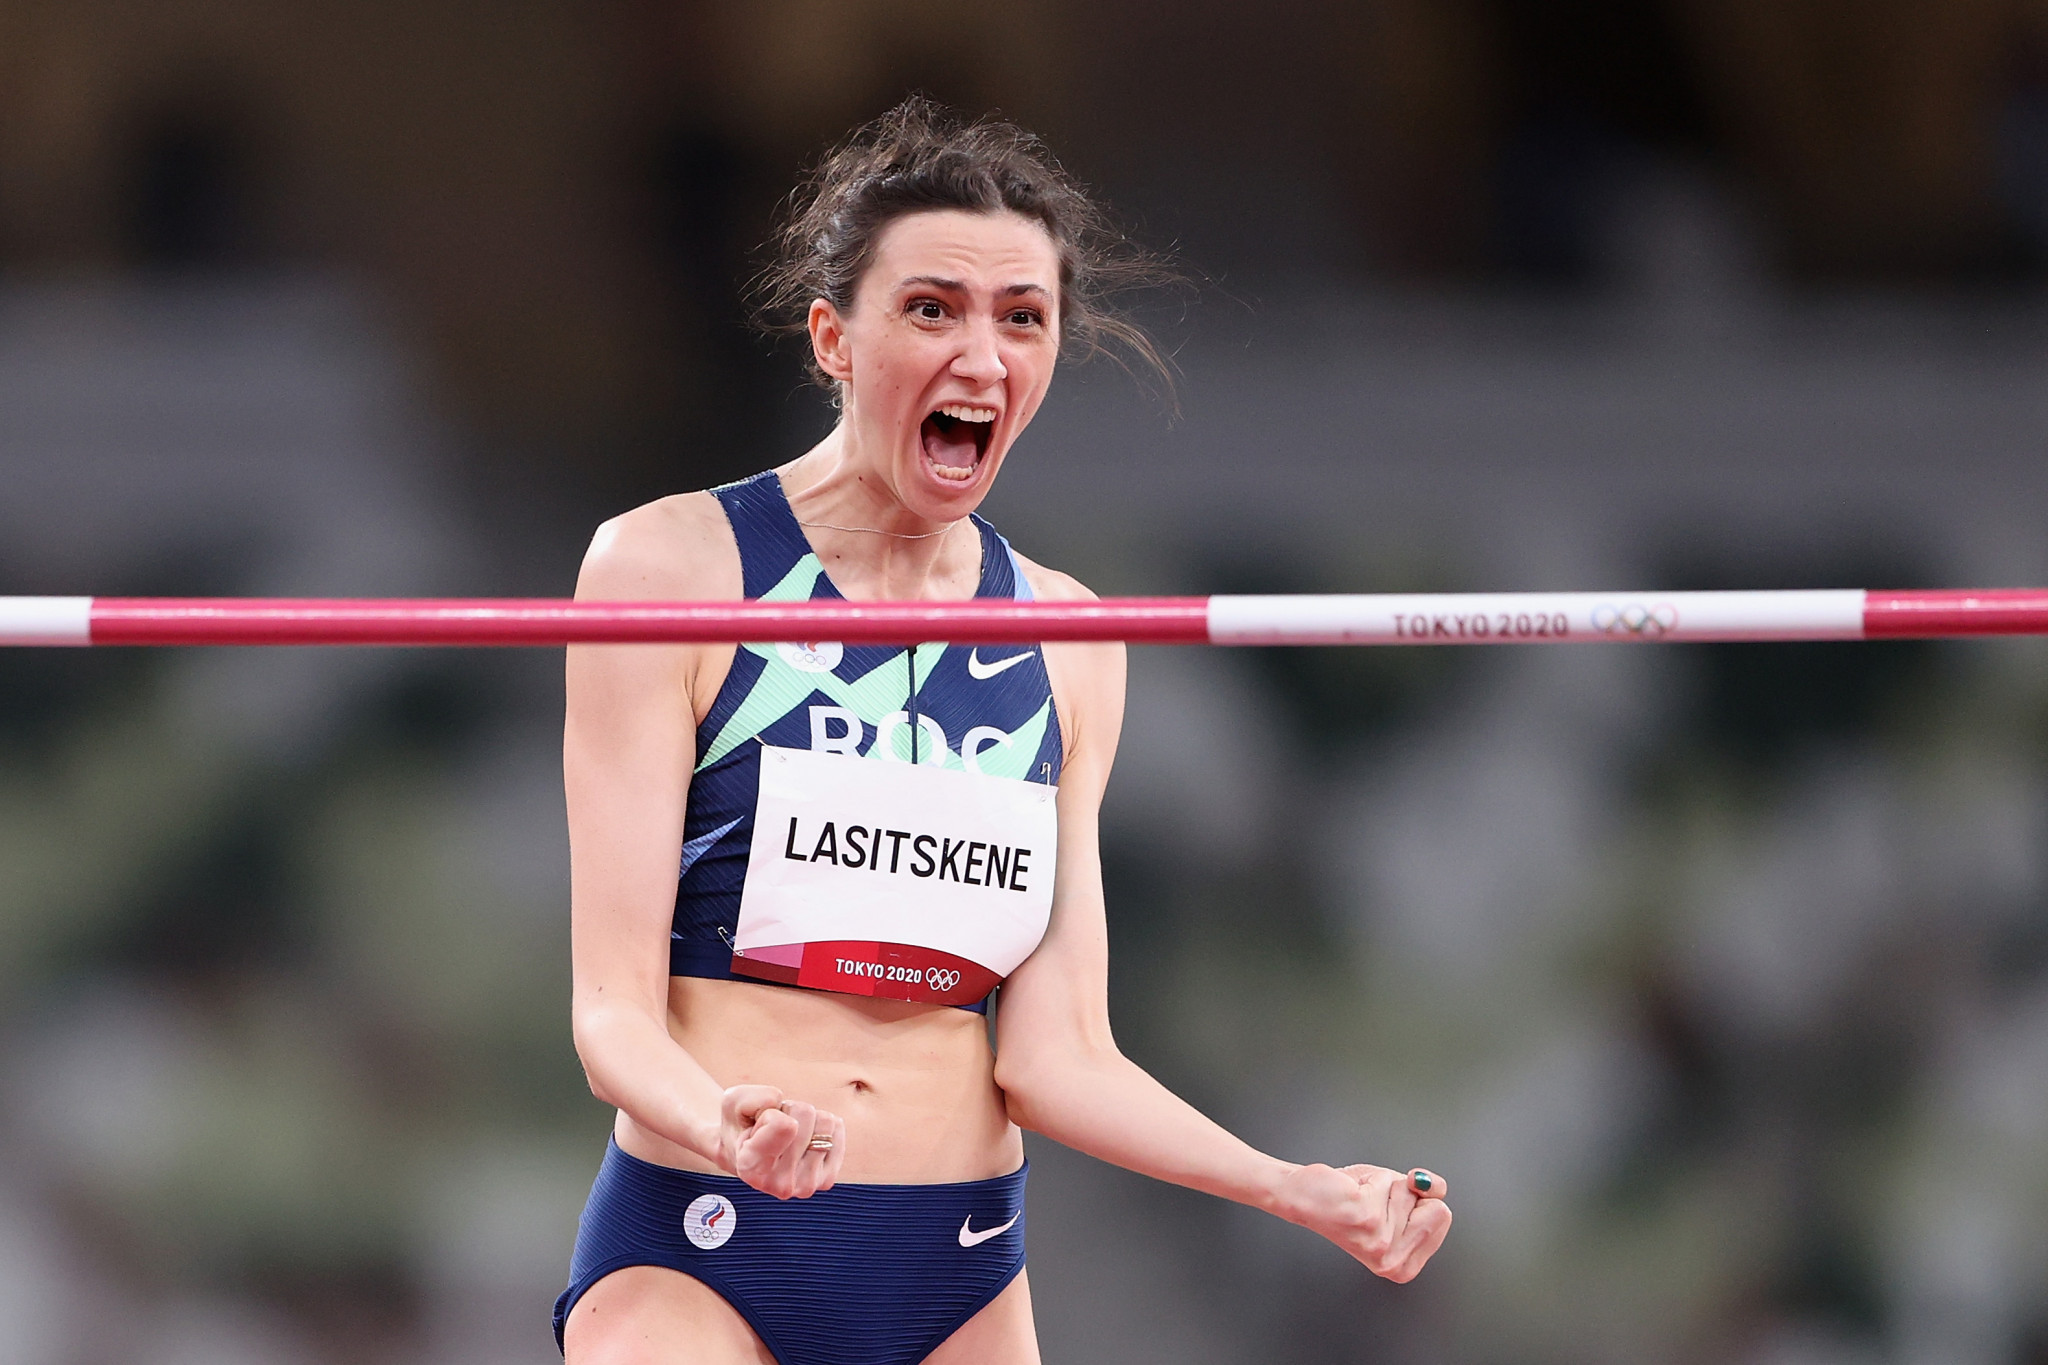 Mariya Lasitskene was another high-profile Russian athlete absent from the list, which World Athletics stressed was 